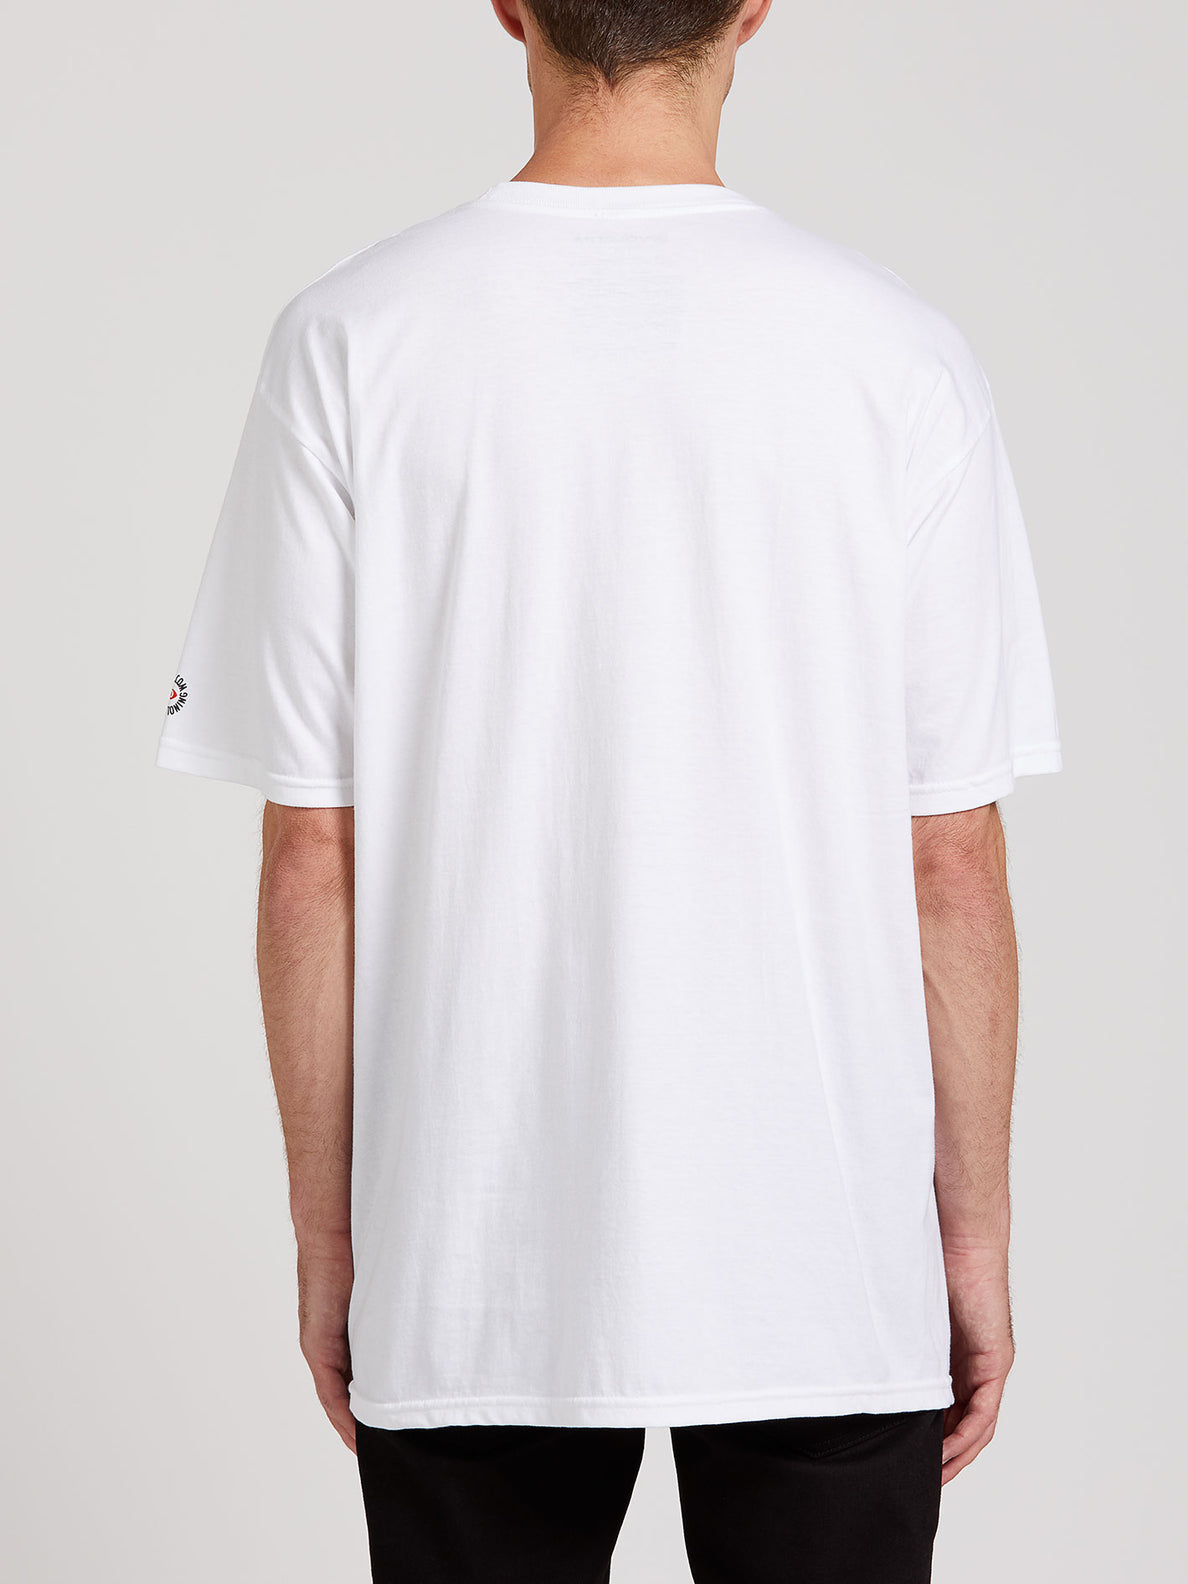 THE PROJECTIONIST SHORT SLEEVE TEE - WHITE